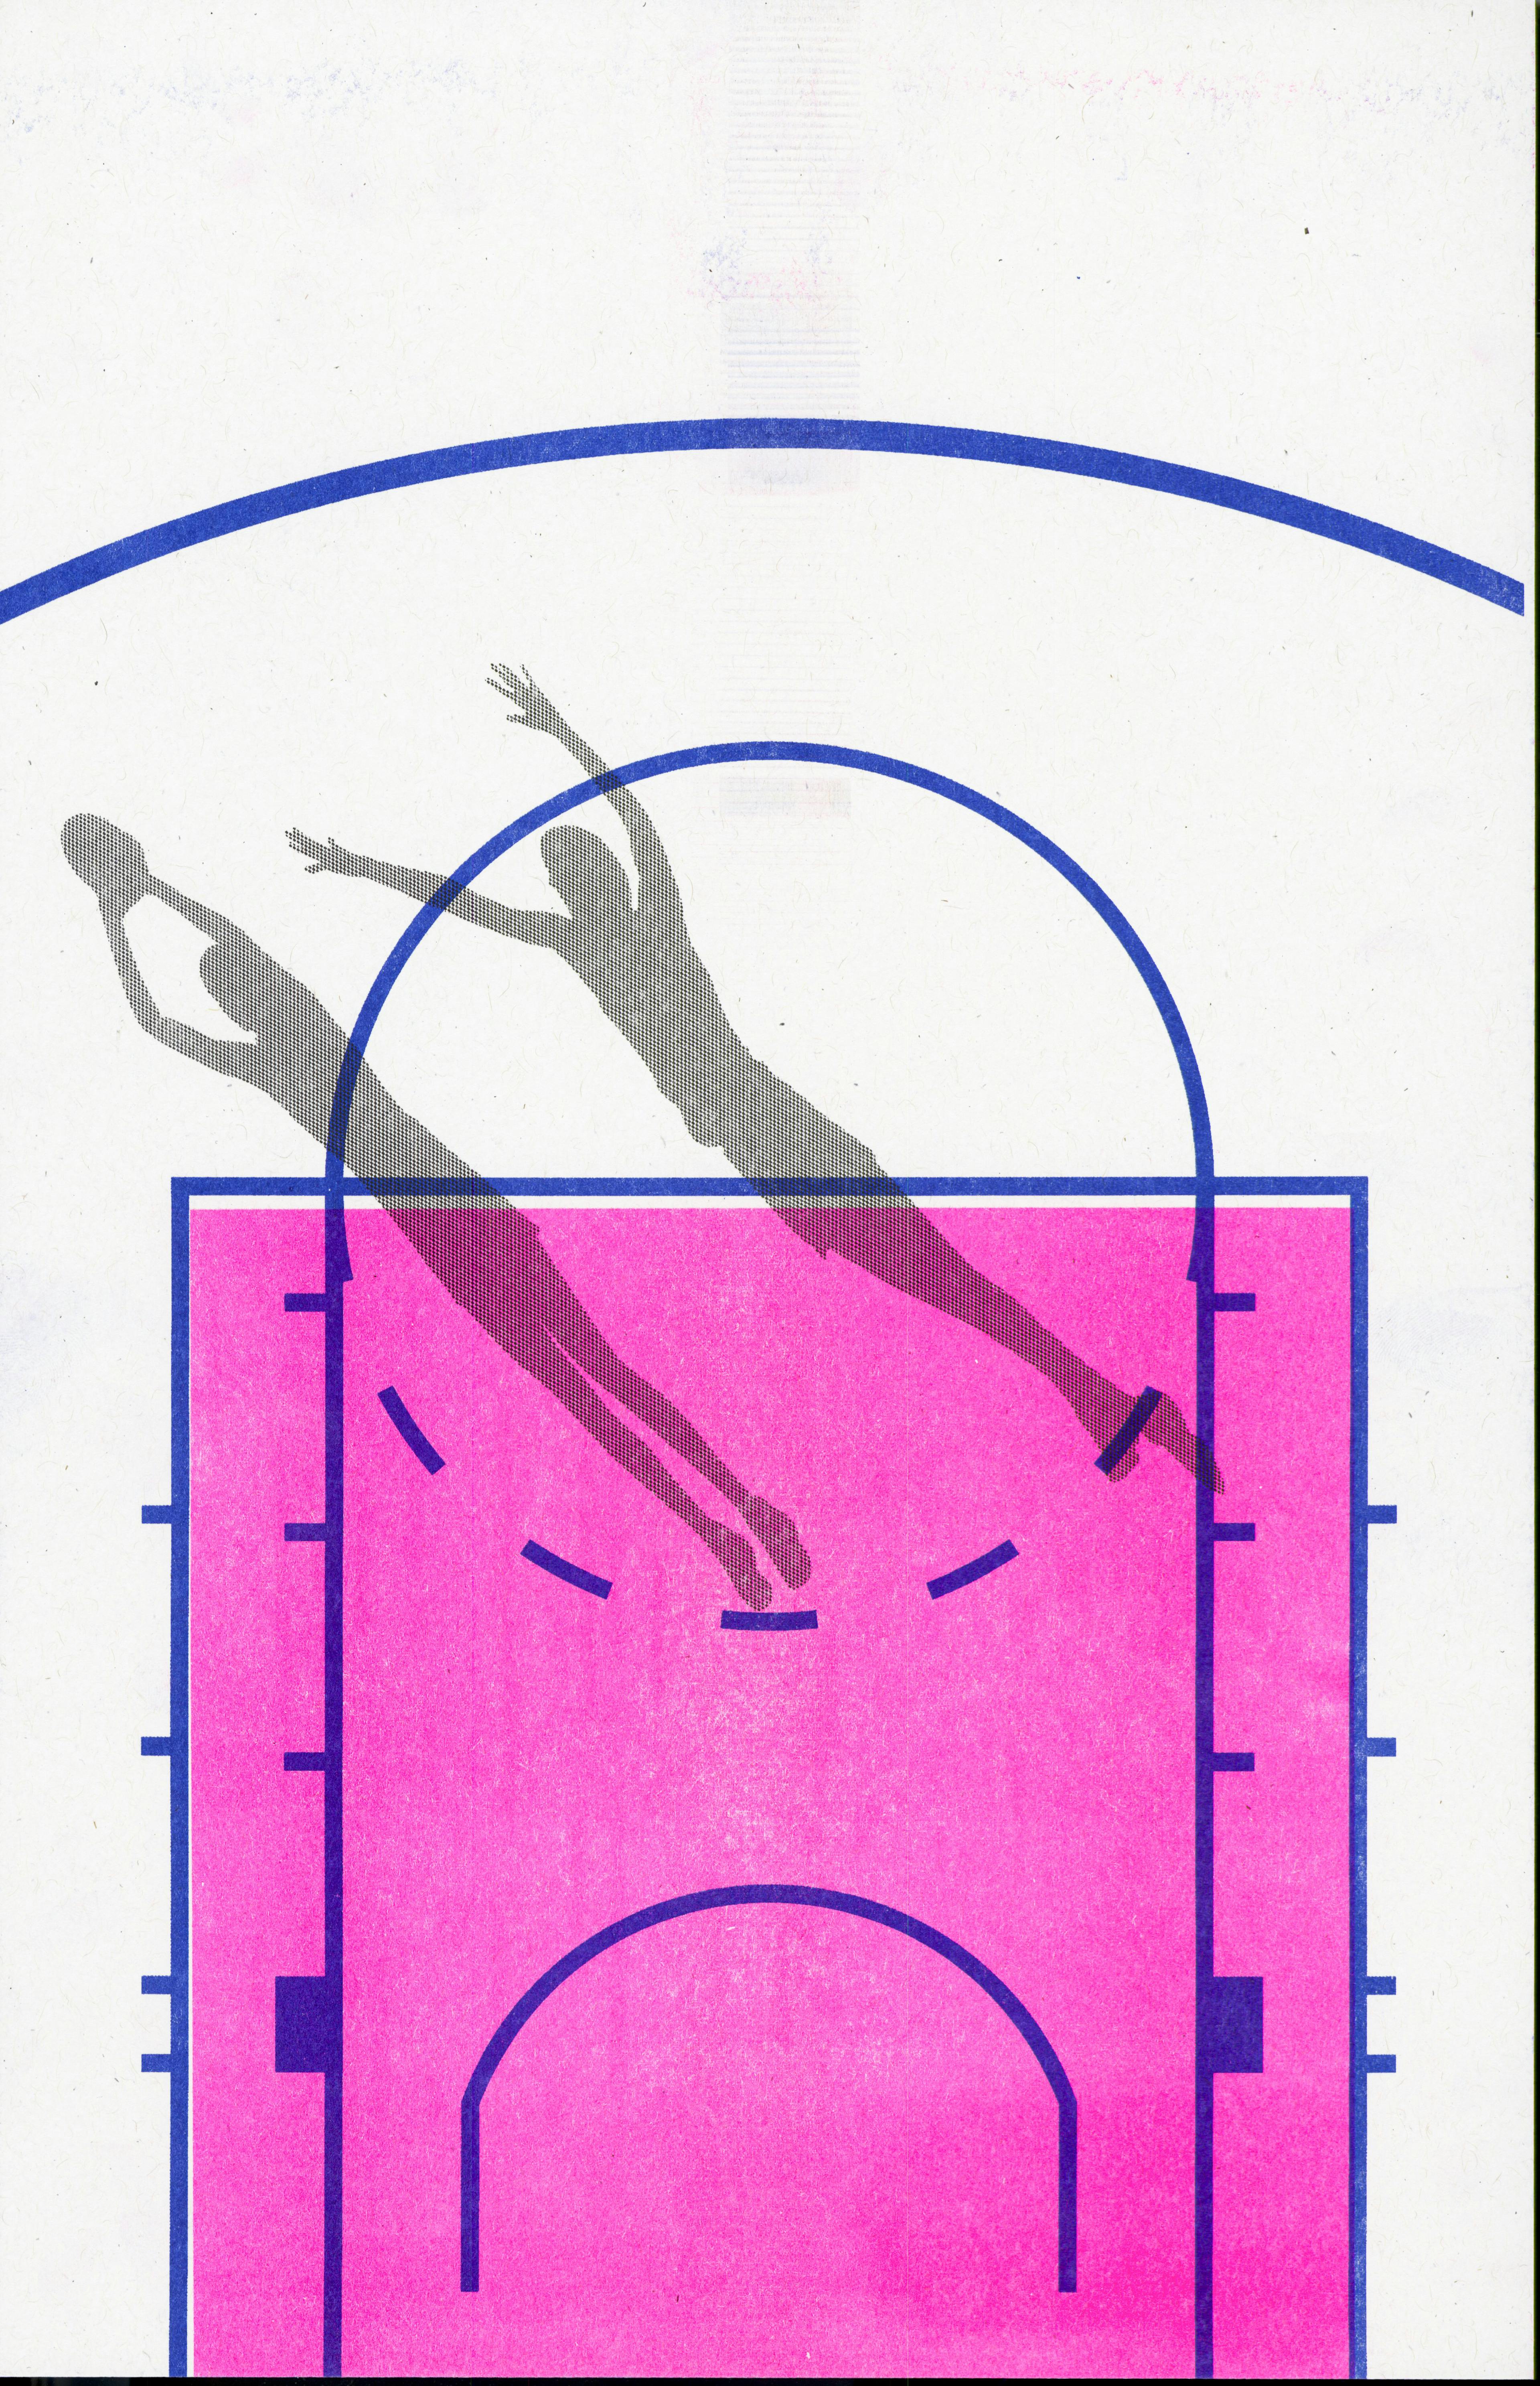 Blue and pink riso print of basketball court with shadow of players